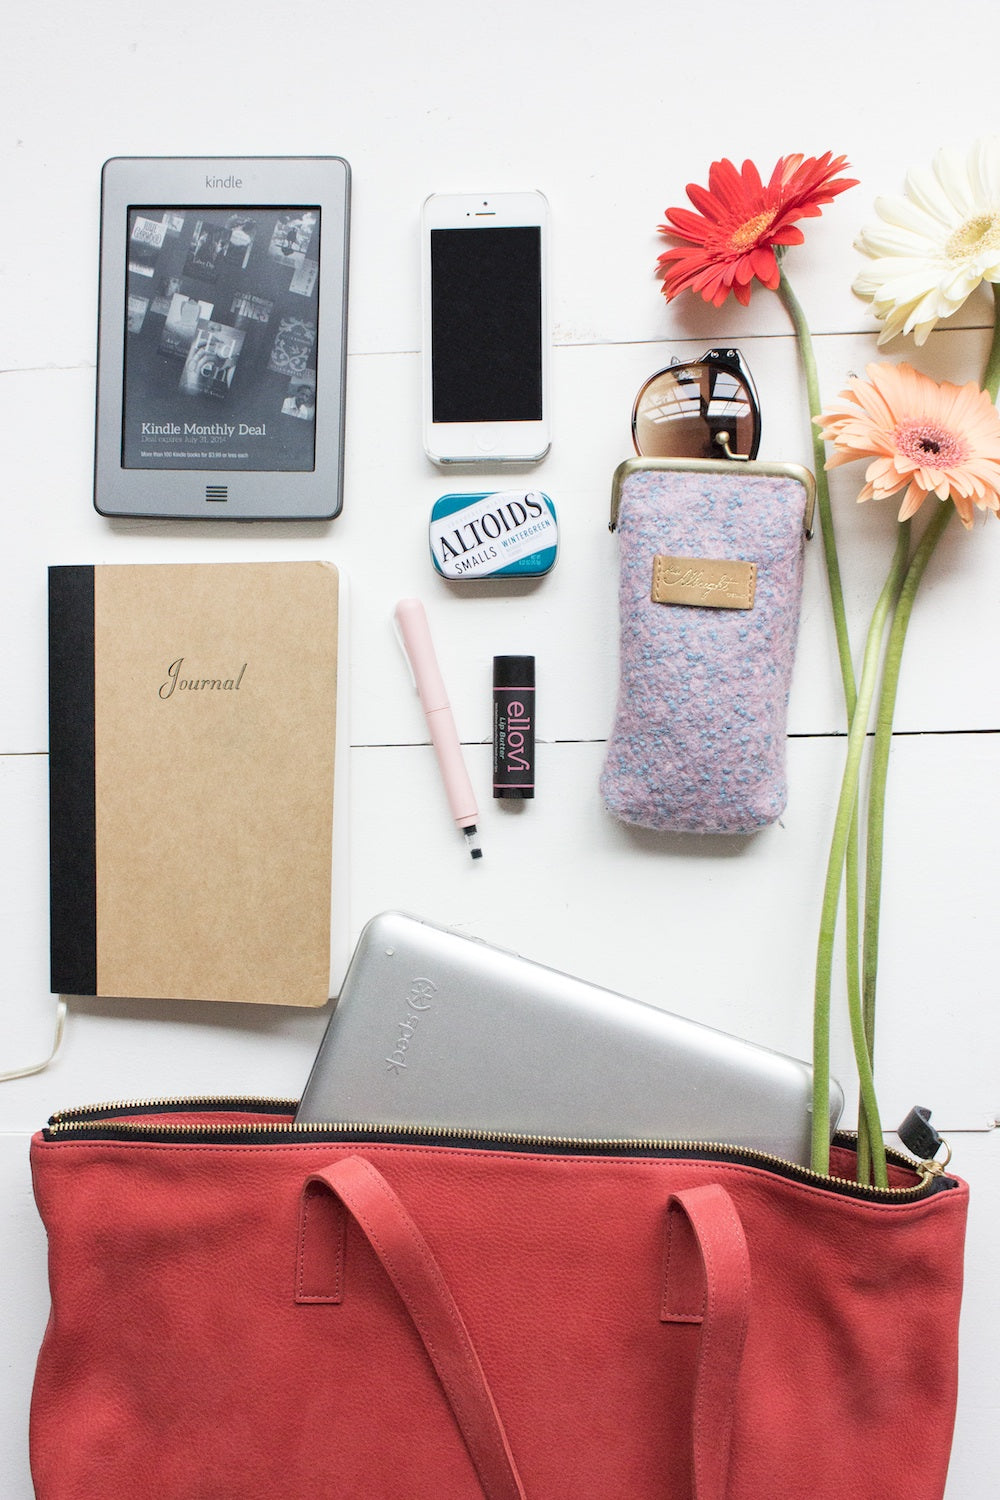 Jessica shares what's inside her Daame leather laptop tote